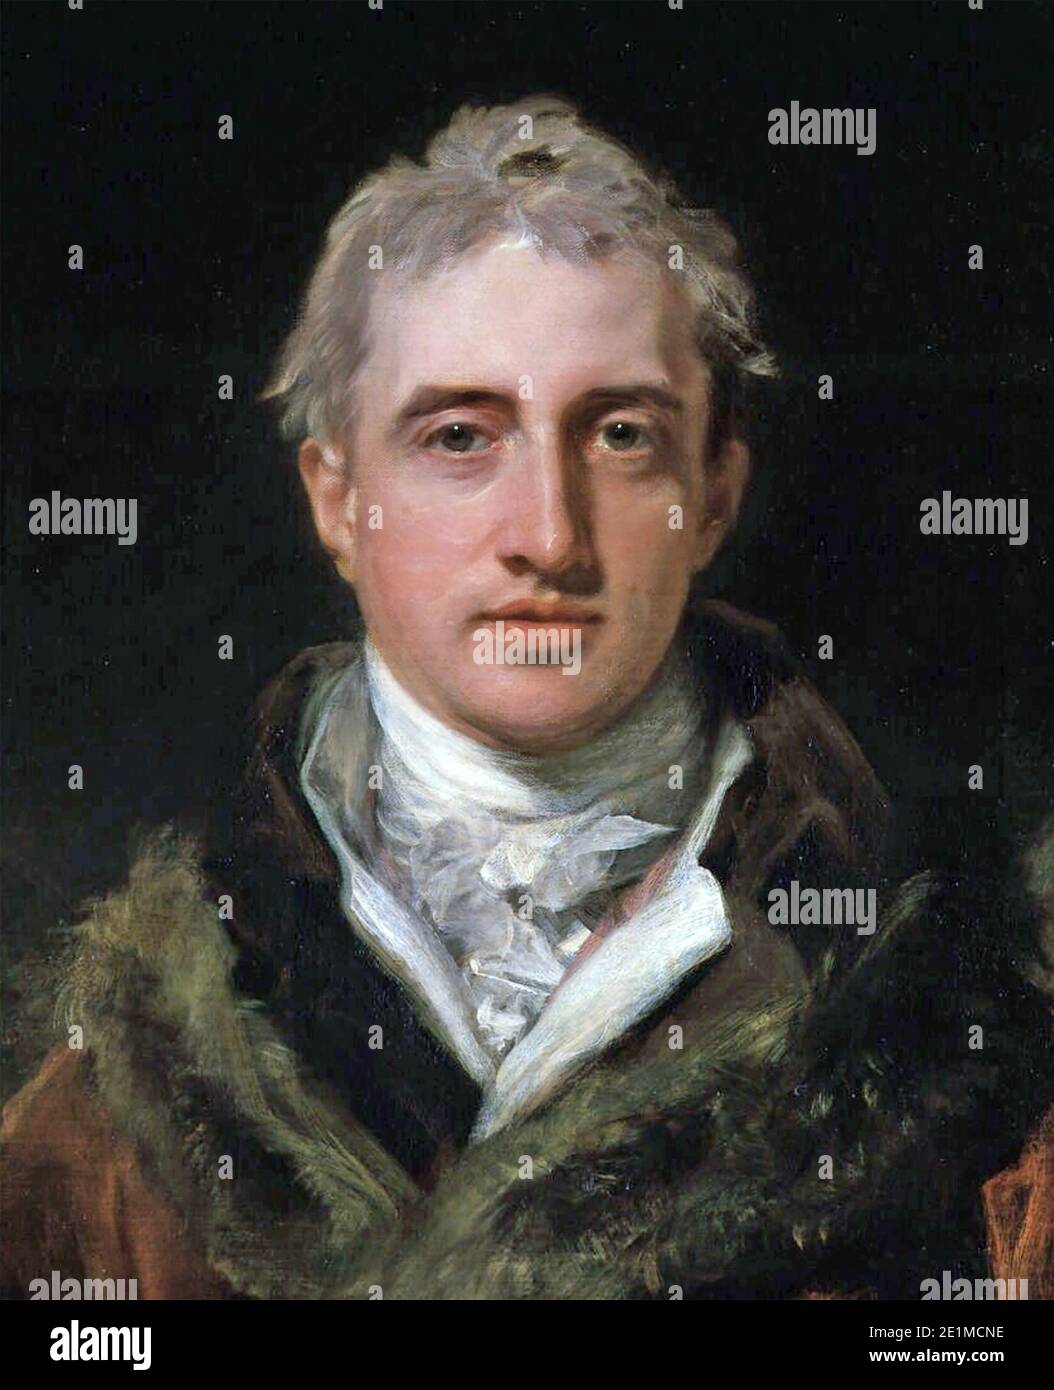 ROBERT STEWART, Lord  Castlereagh (1769-1822) Anglo-Irish politician, about 1810. Stock Photo